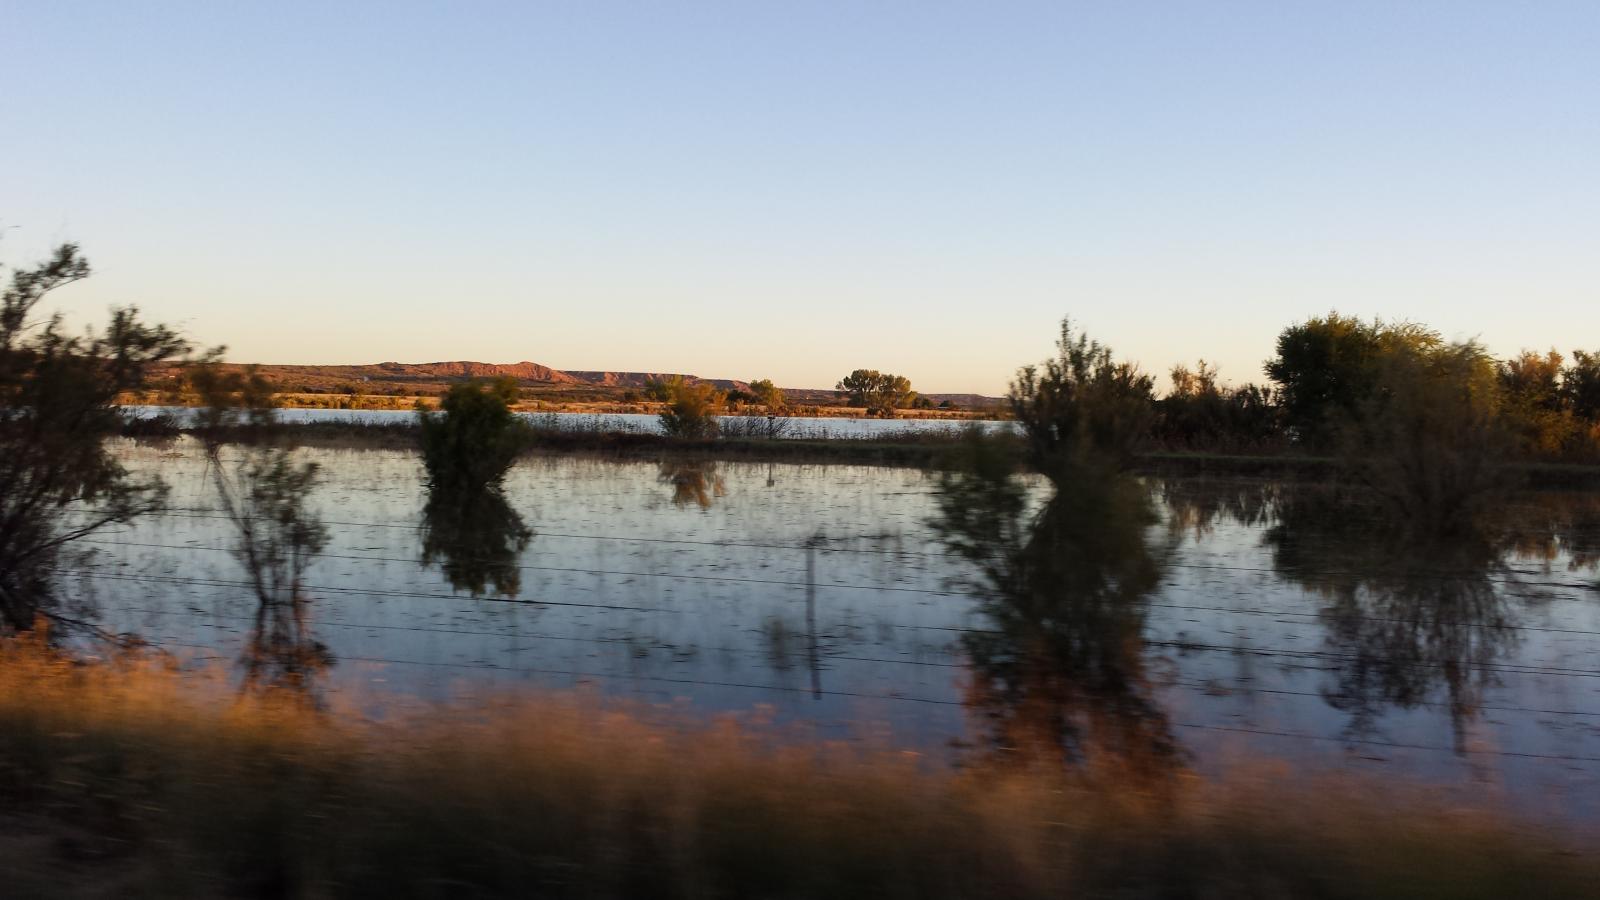 Standing water can be seen several days after flooding inundated the Rio Puerco. Image taken near Bernardo at U.S. Highway 60 on September 23, 2013.